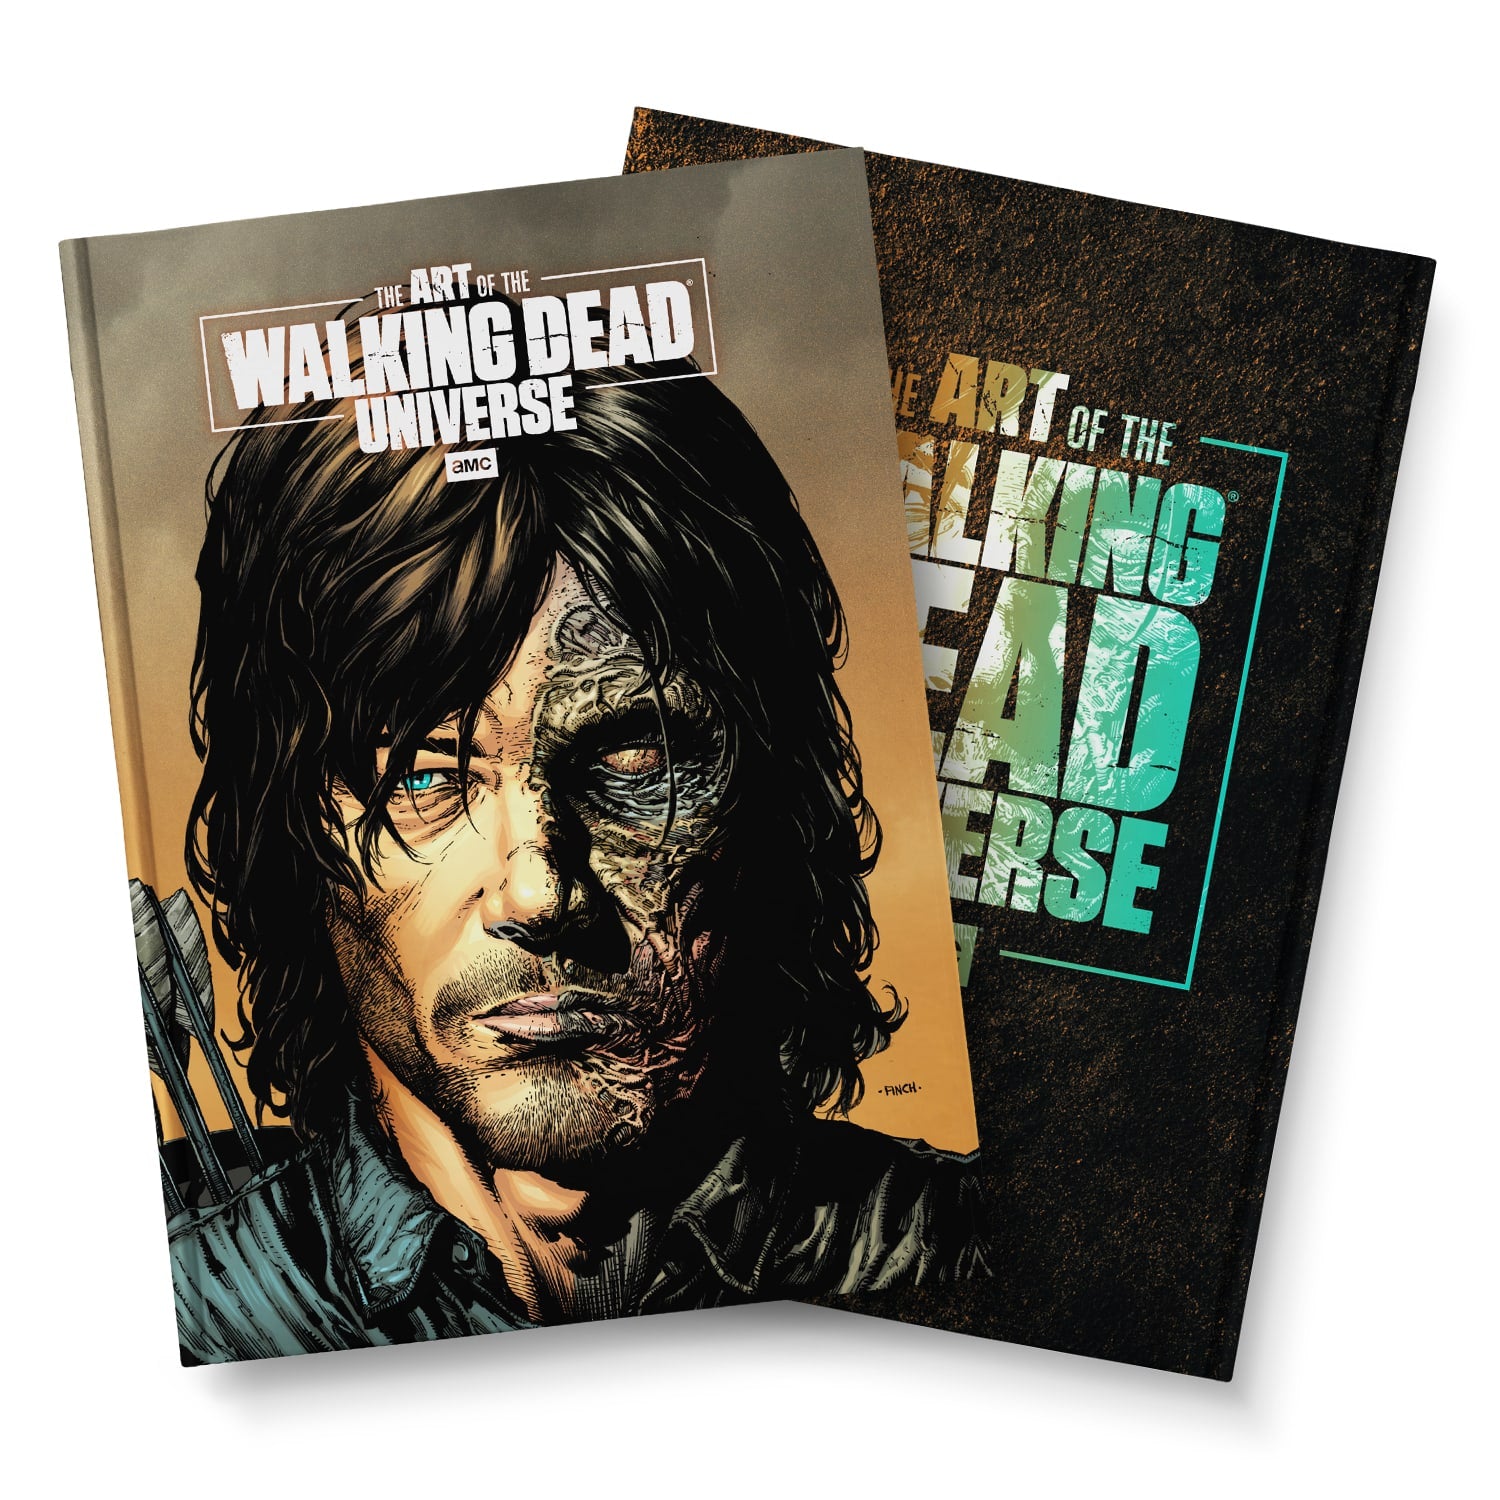 ART OF AMC'S THE WALKING DEAD UNIVERSE HC SKYBOUND EXCLUSIVE